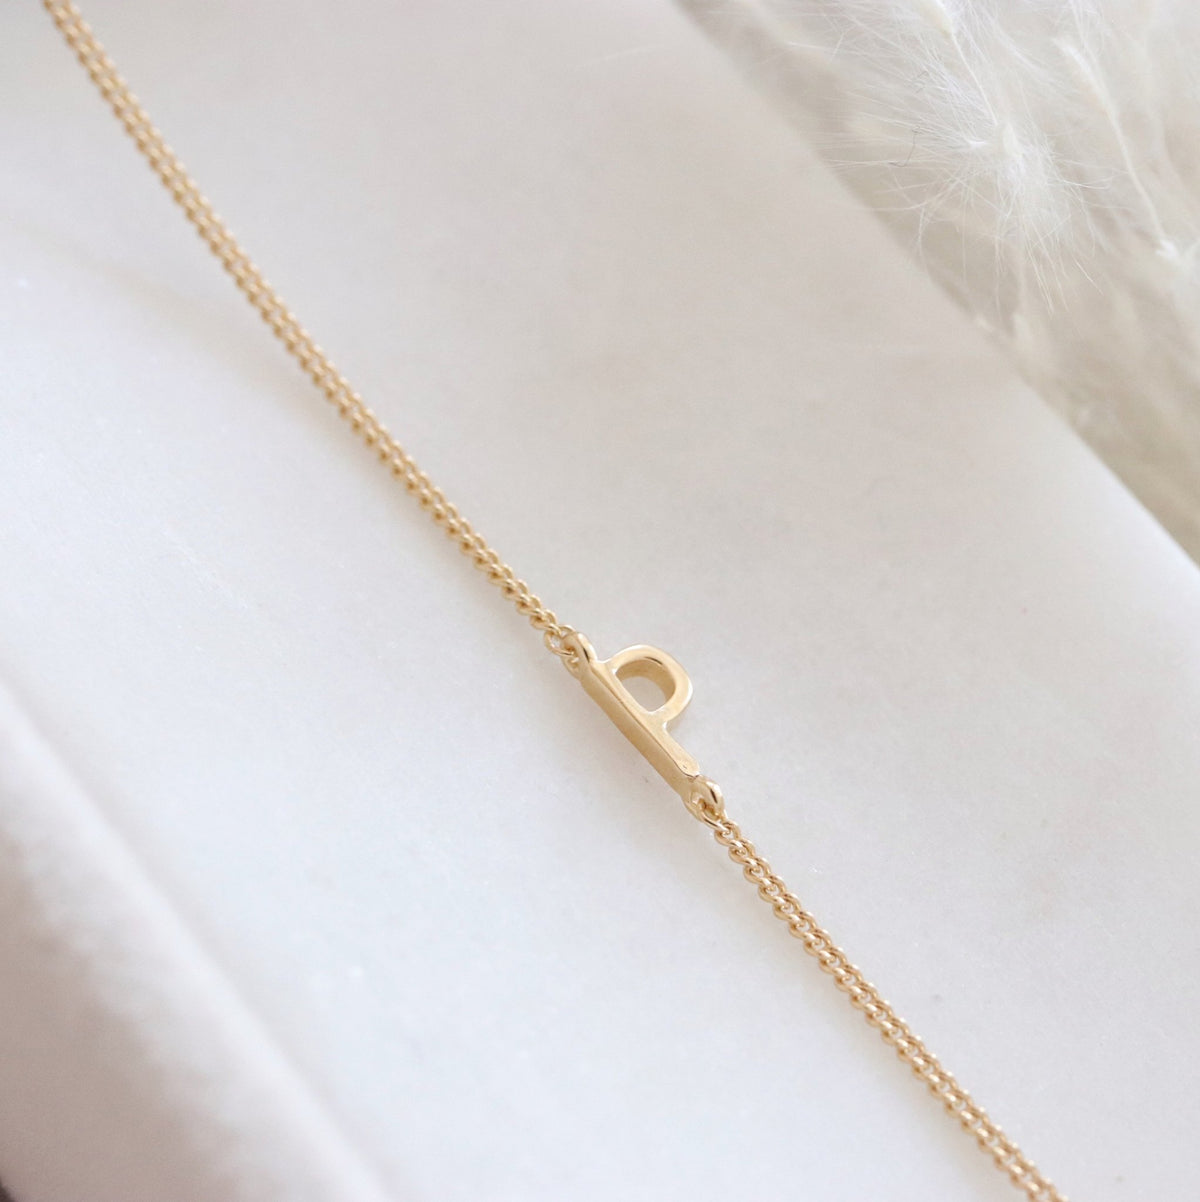 NOTABLE OFFSET INITIAL NECKLACE - P - GOLD - SO PRETTY CARA COTTER